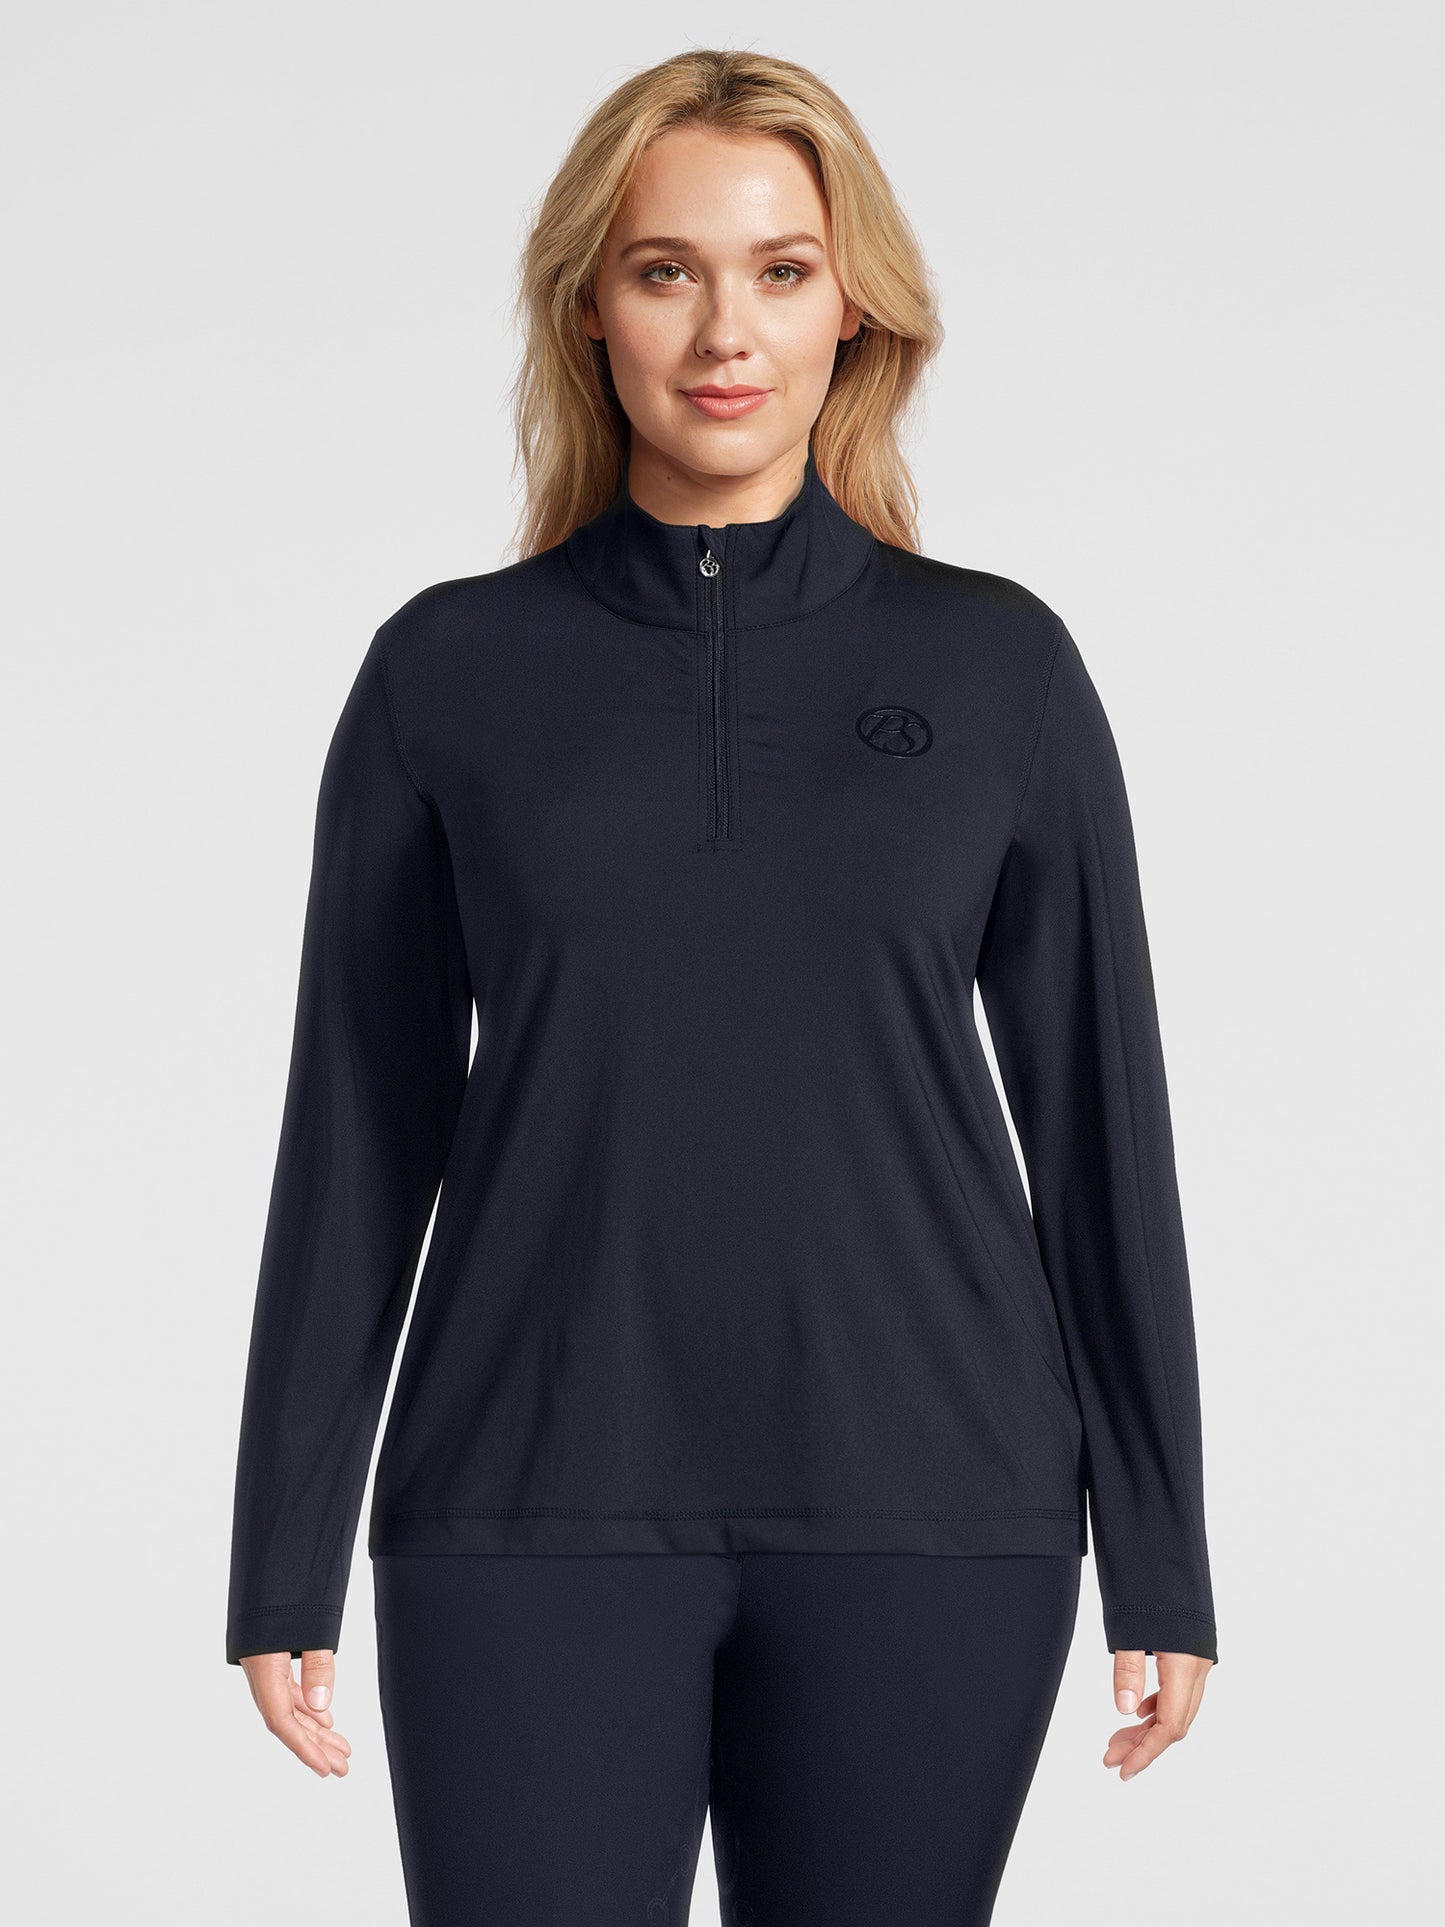 PS of Sweden Curvy Base Layer Anna | Black or Navy